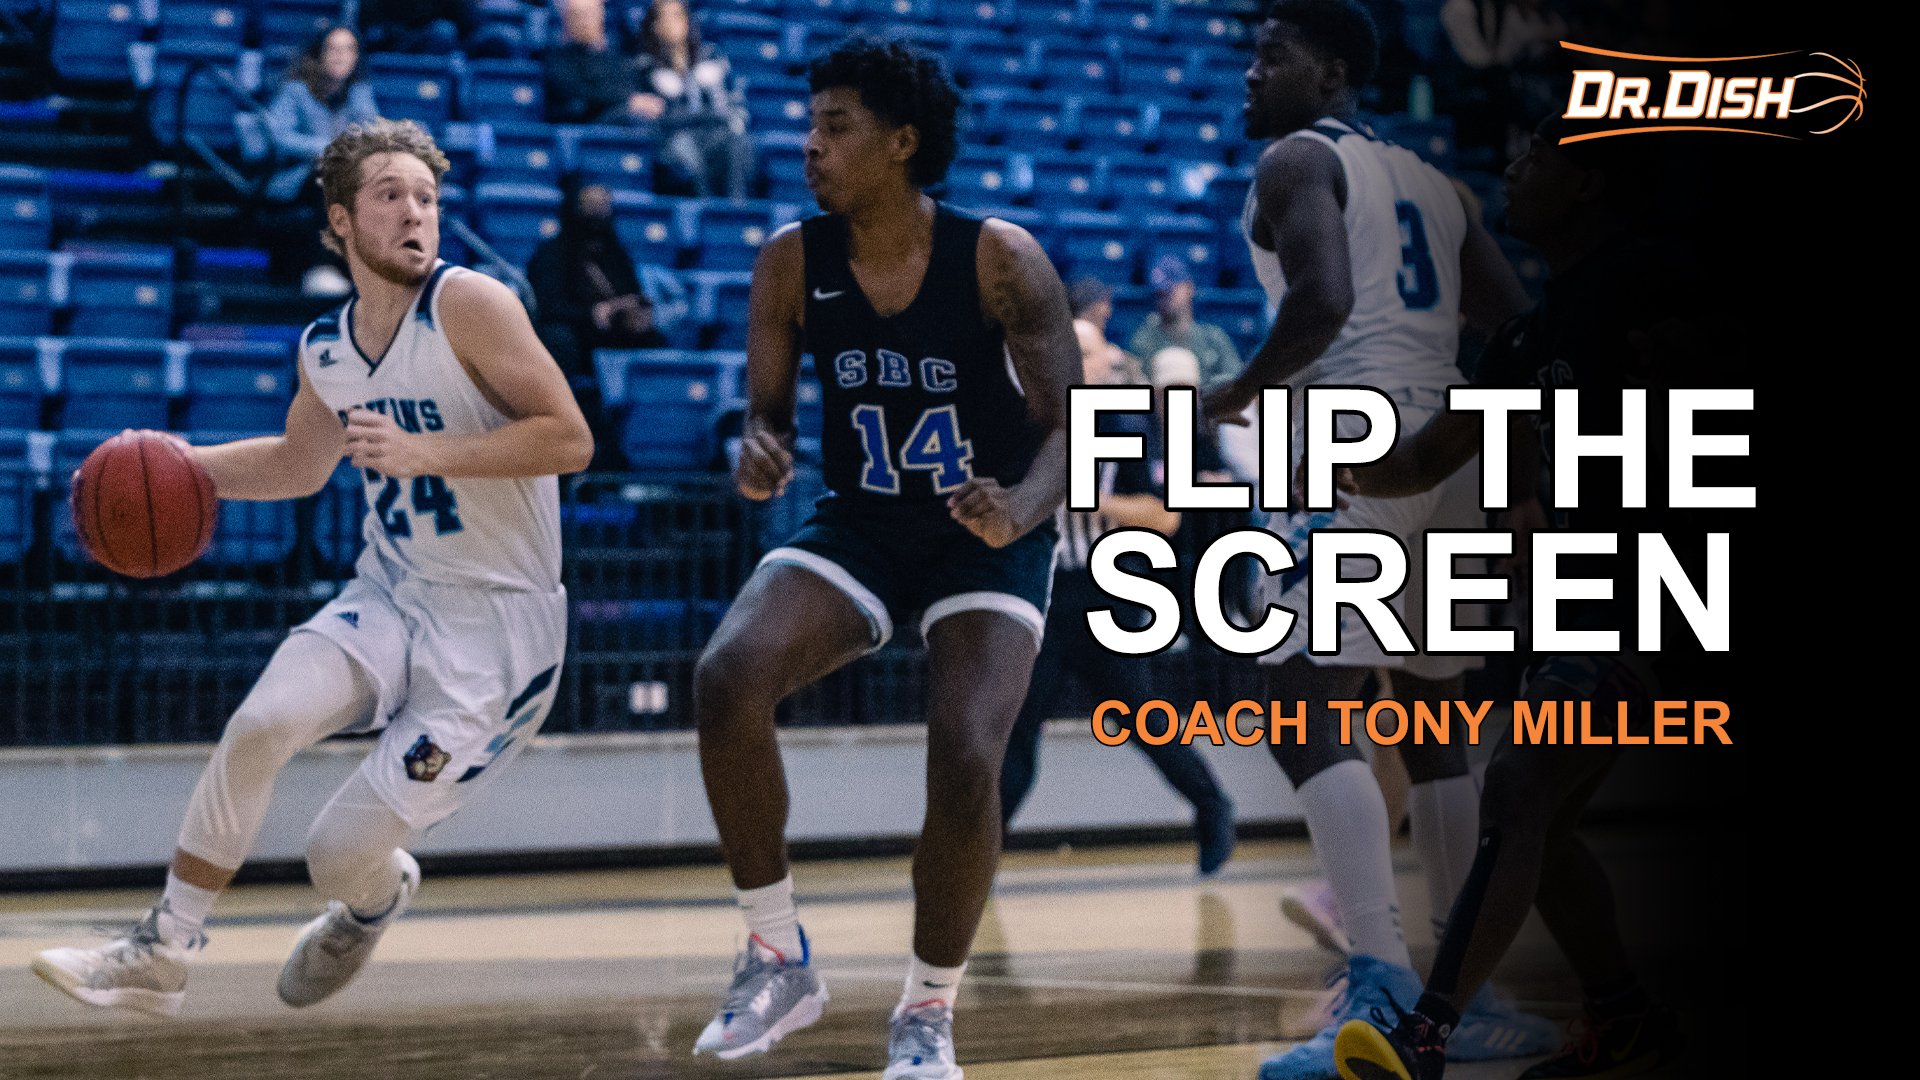 Basketball Drills: Flip the Screen with Coach Tony Miller